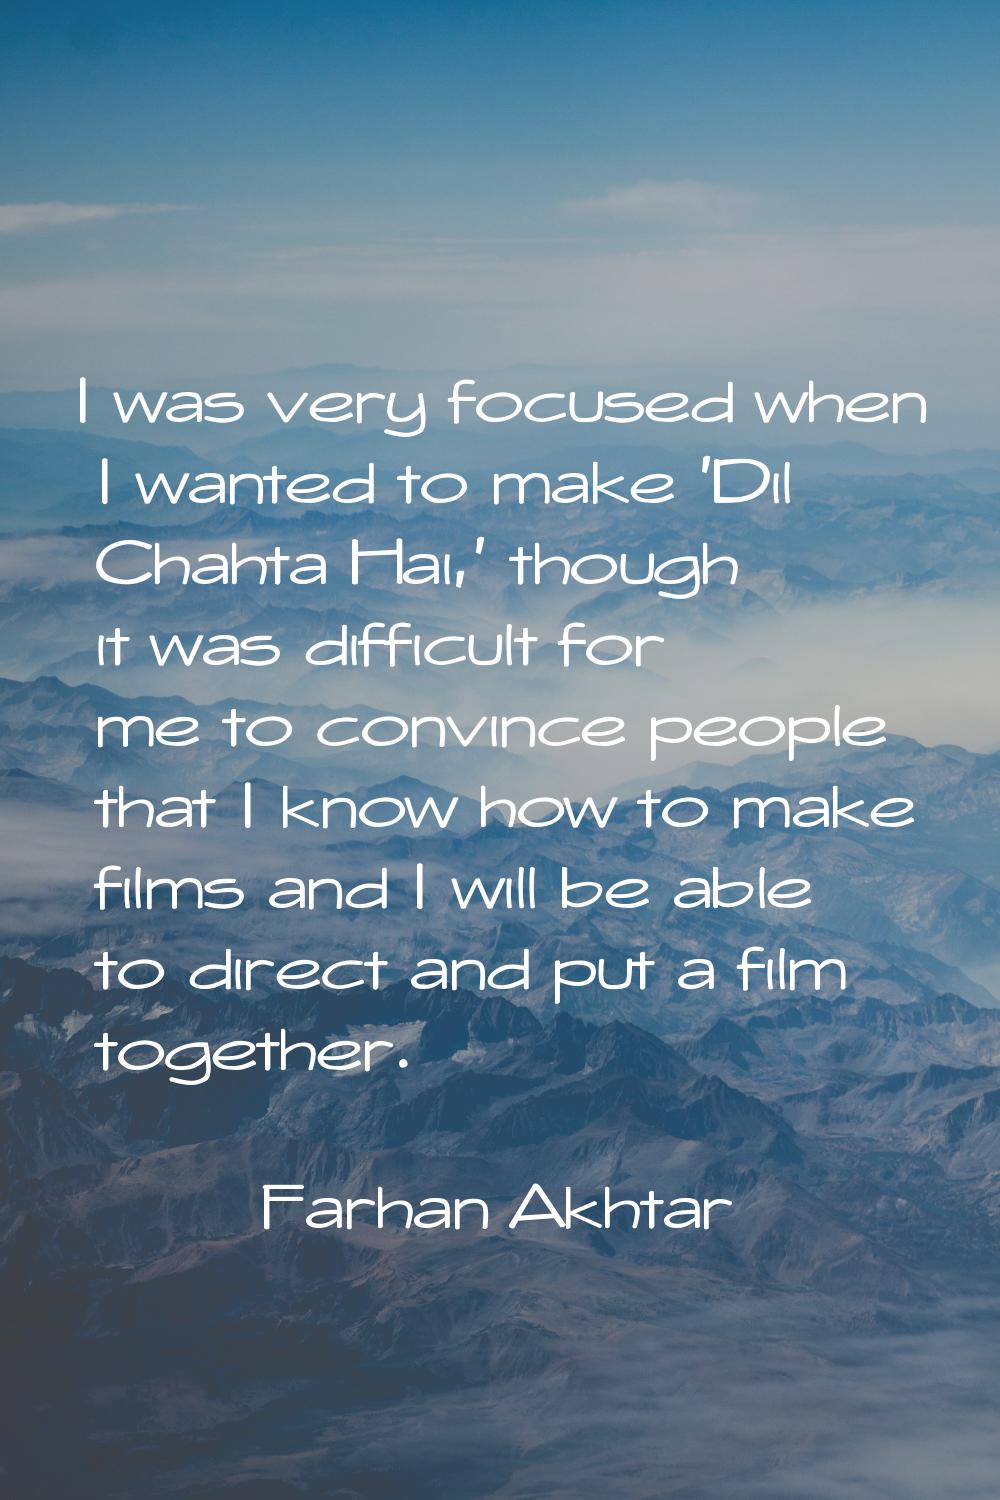 I was very focused when I wanted to make 'Dil Chahta Hai,' though it was difficult for me to convin